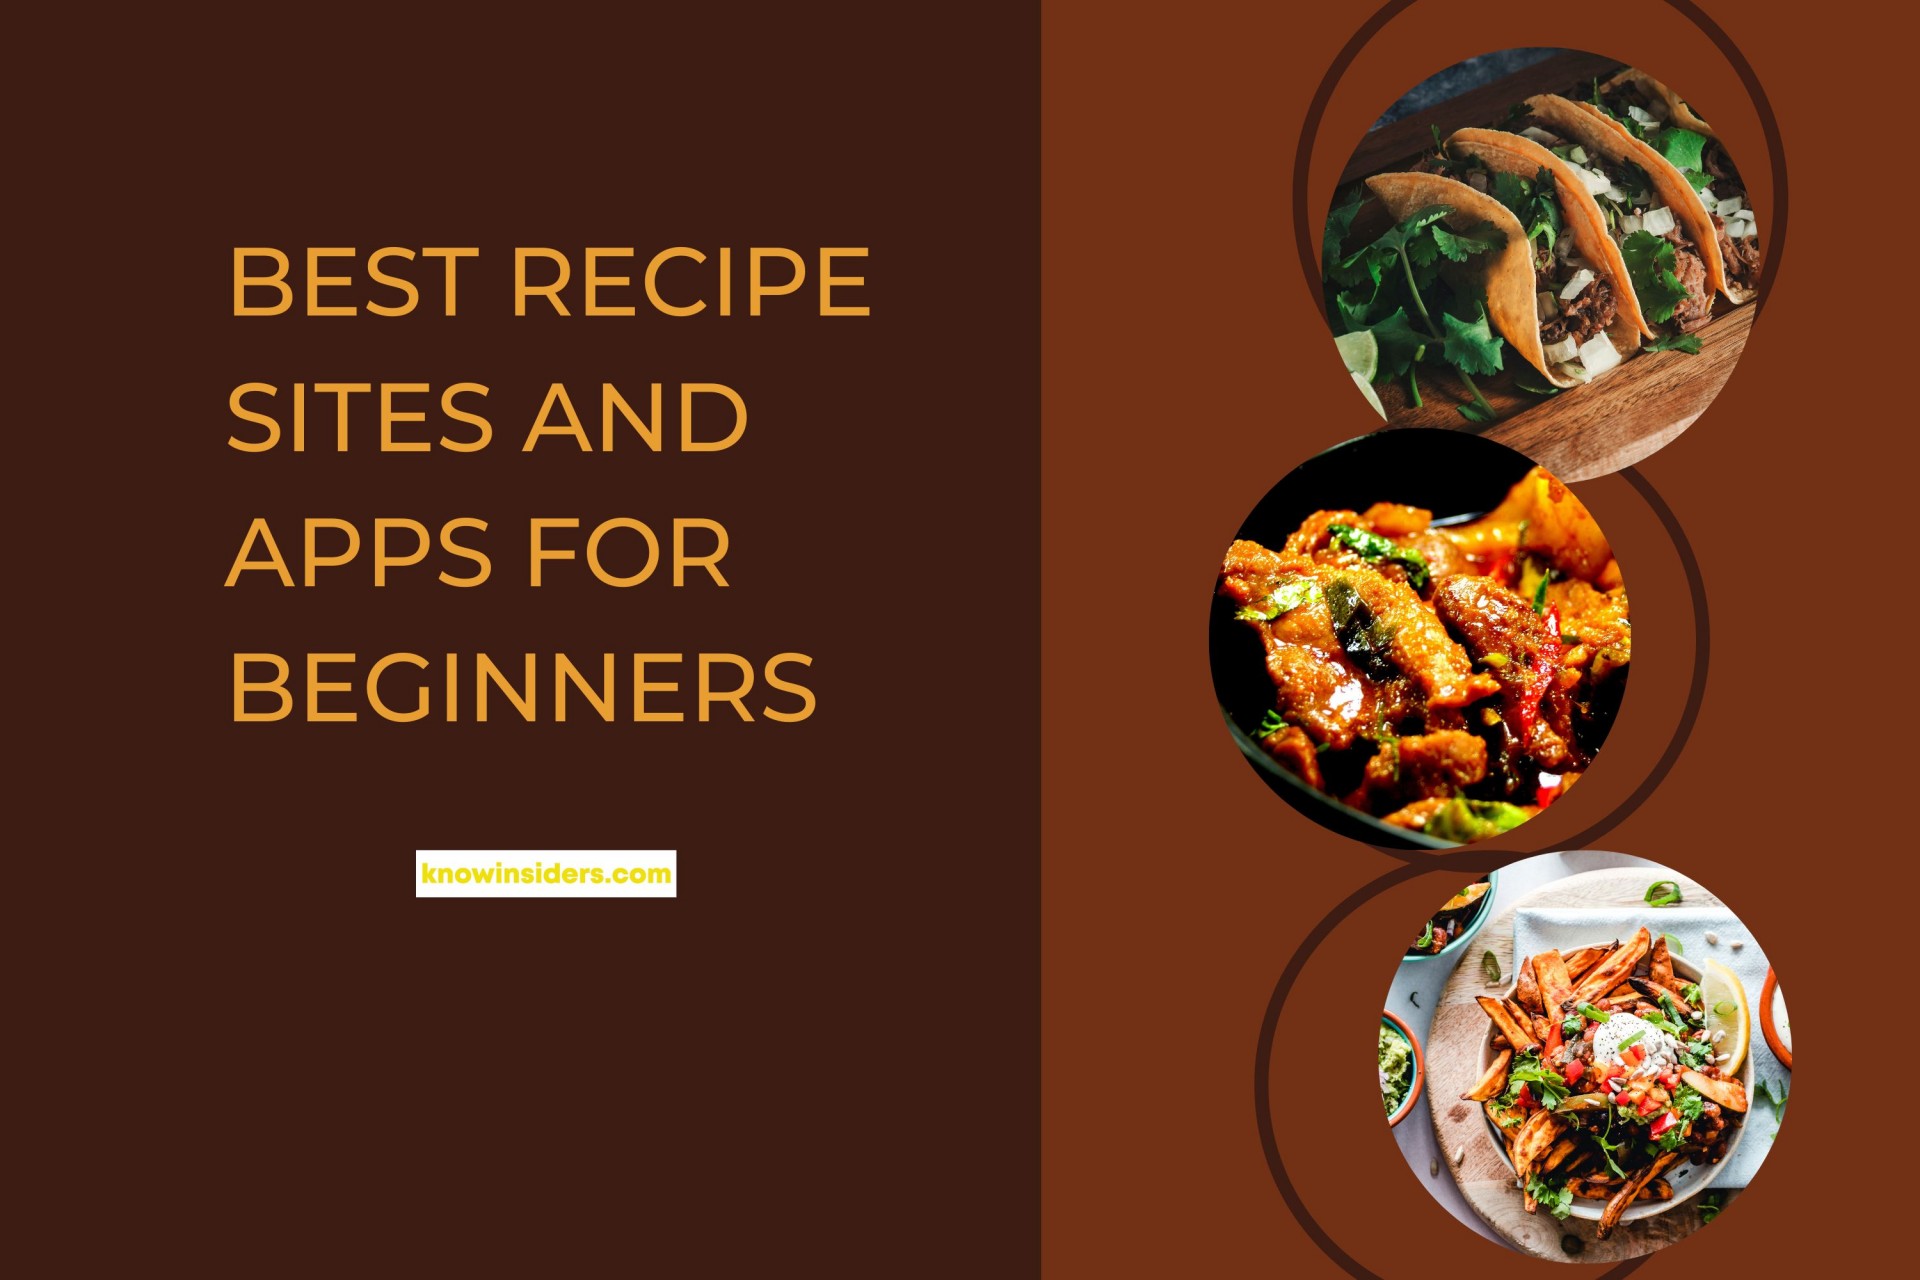 Top 20 Best Recipe Sites And Apps For Cooking Beginners